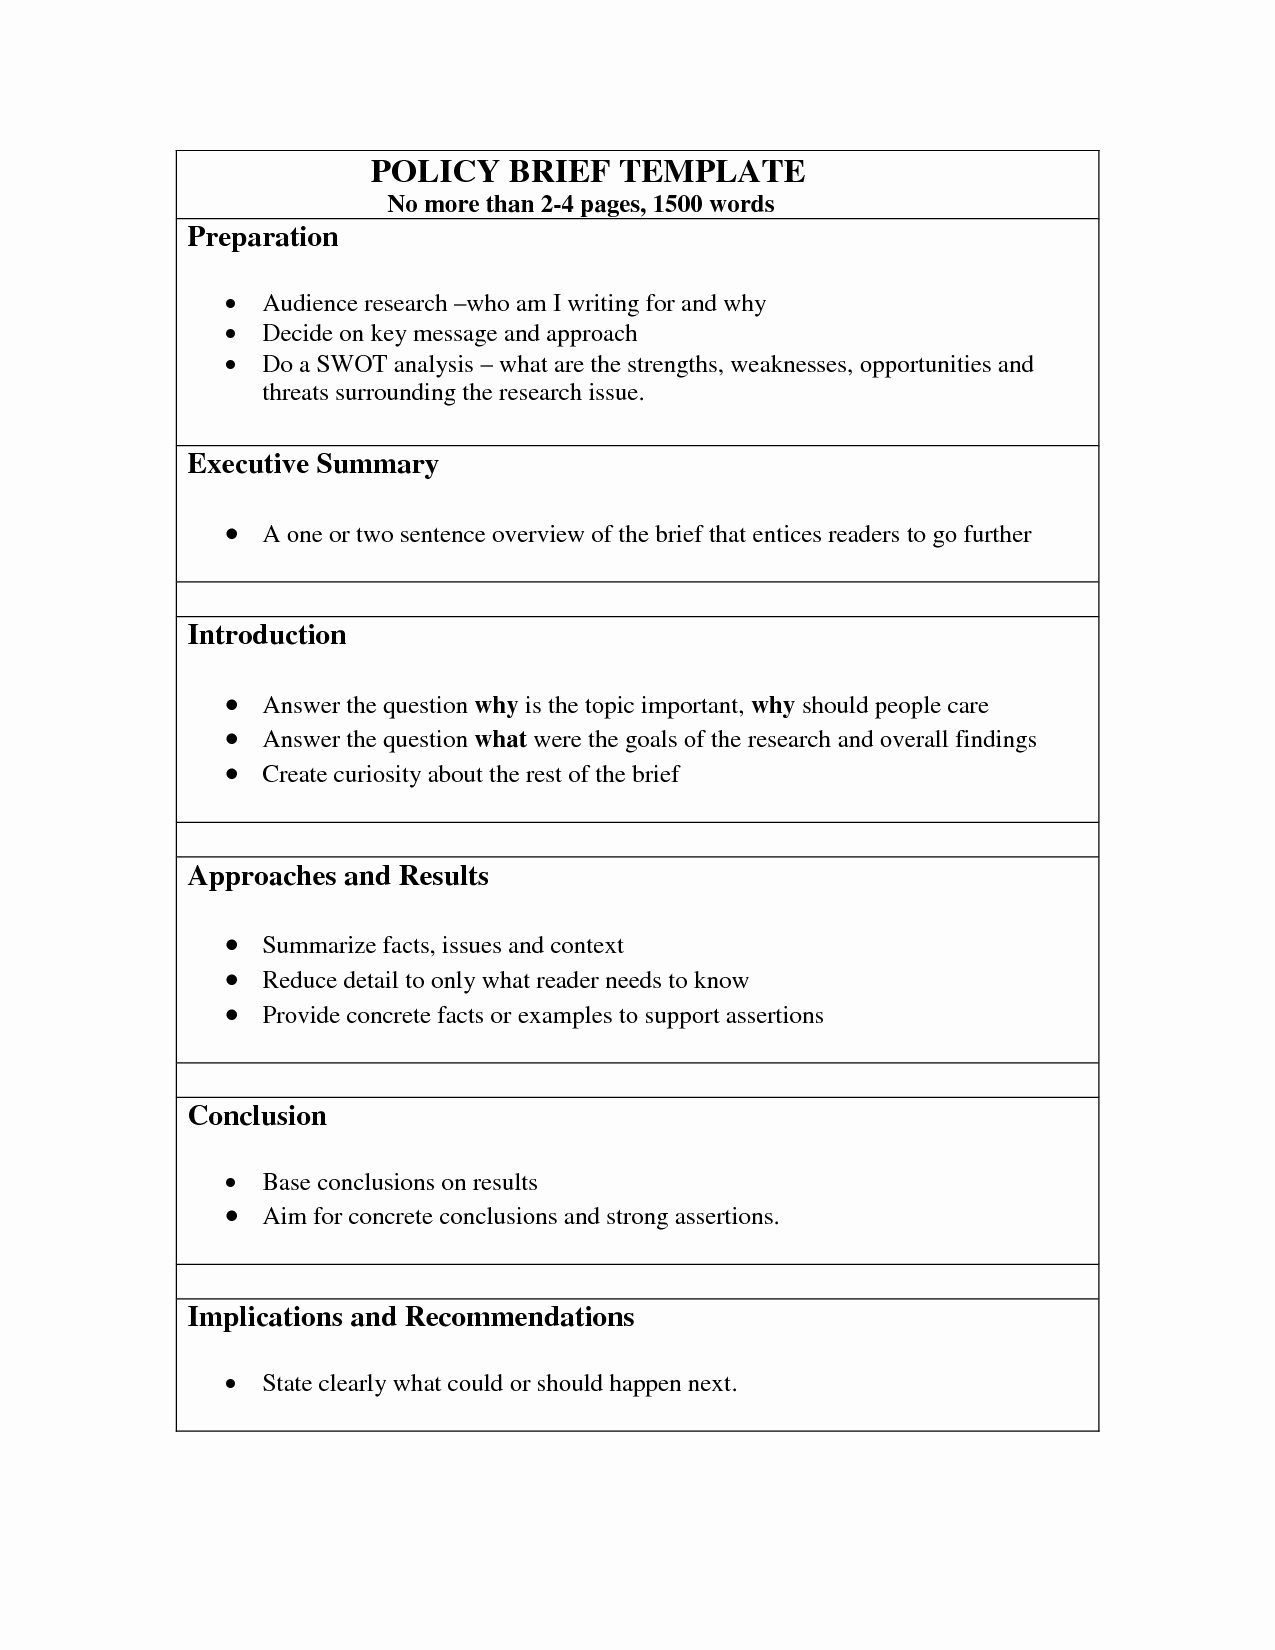 Policy Brief Template and Powerpoint